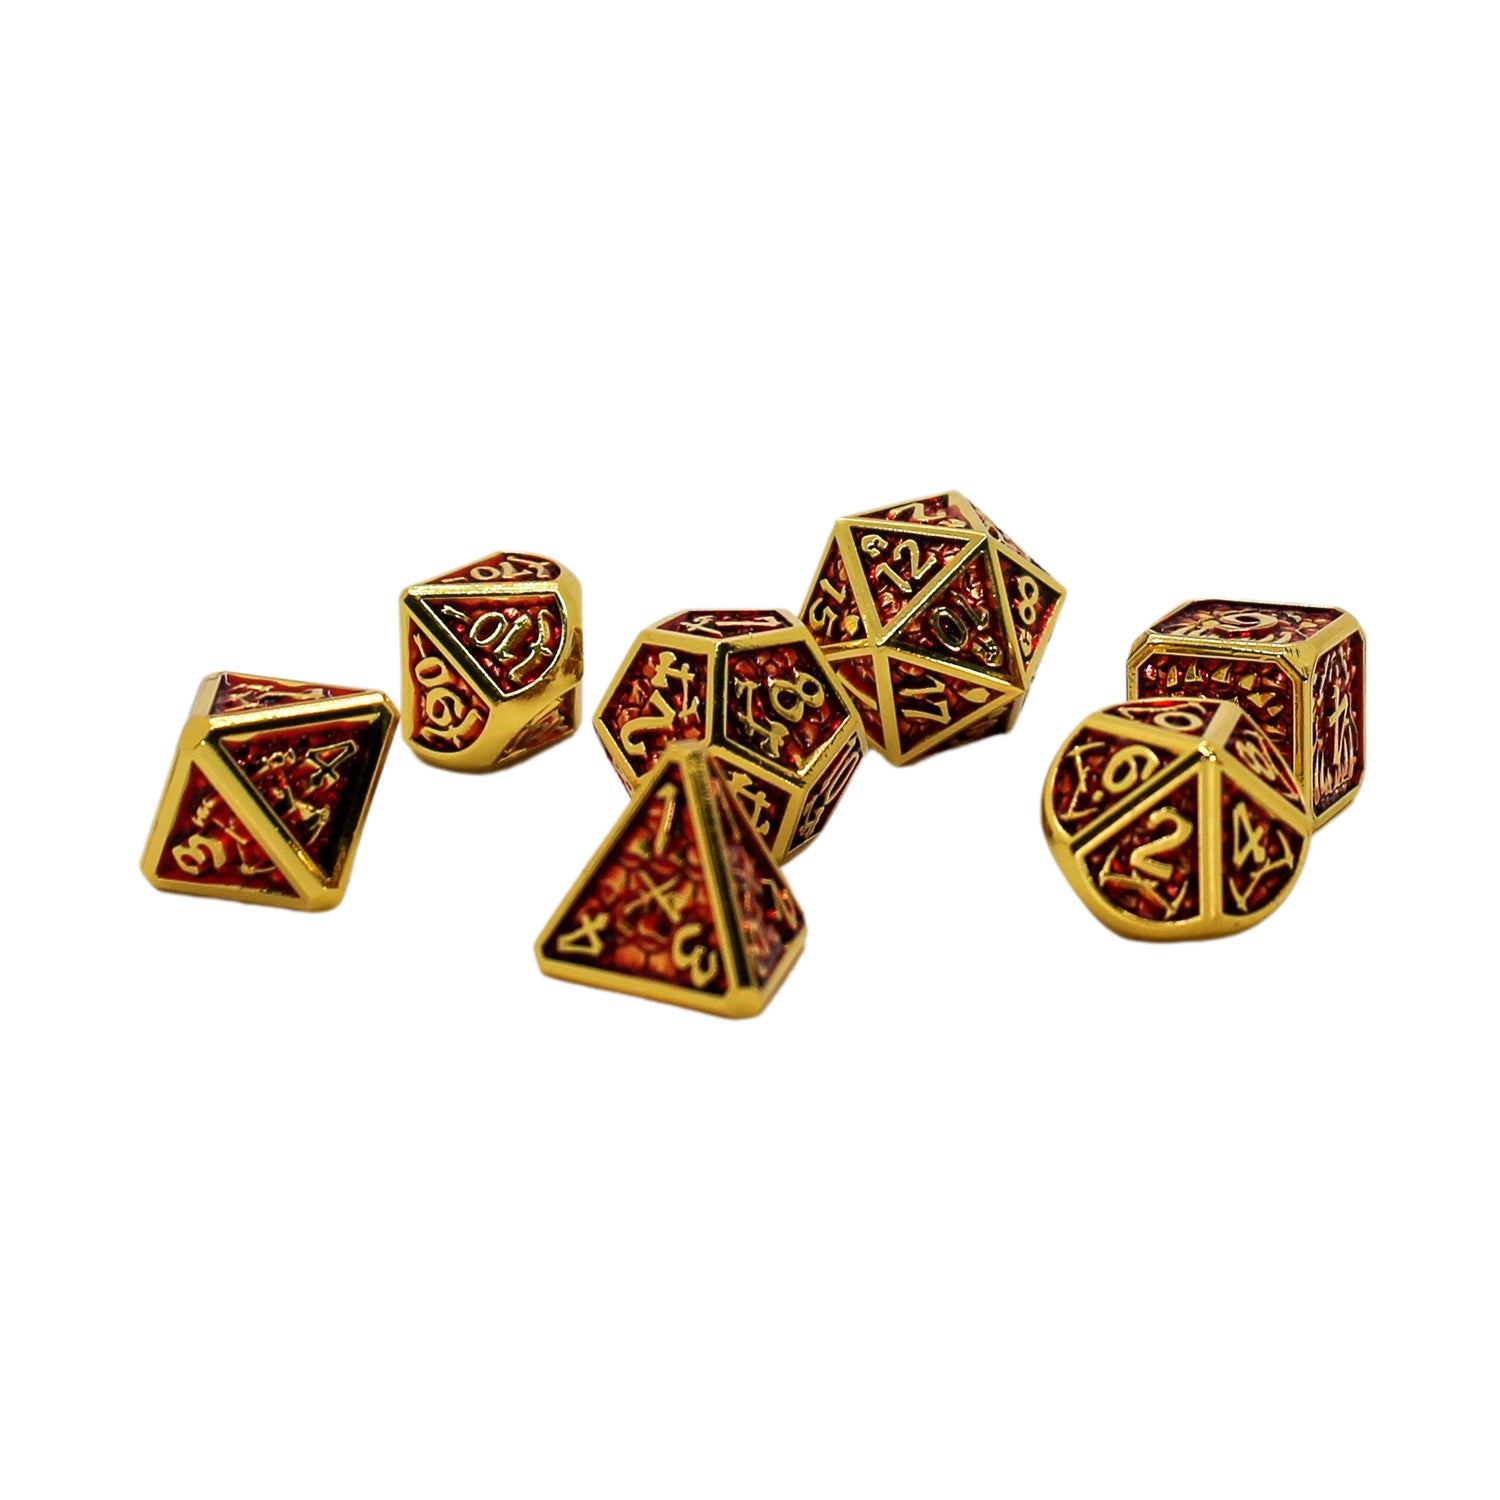 Seven Seas Metal Red and Gold Colored Dice Set